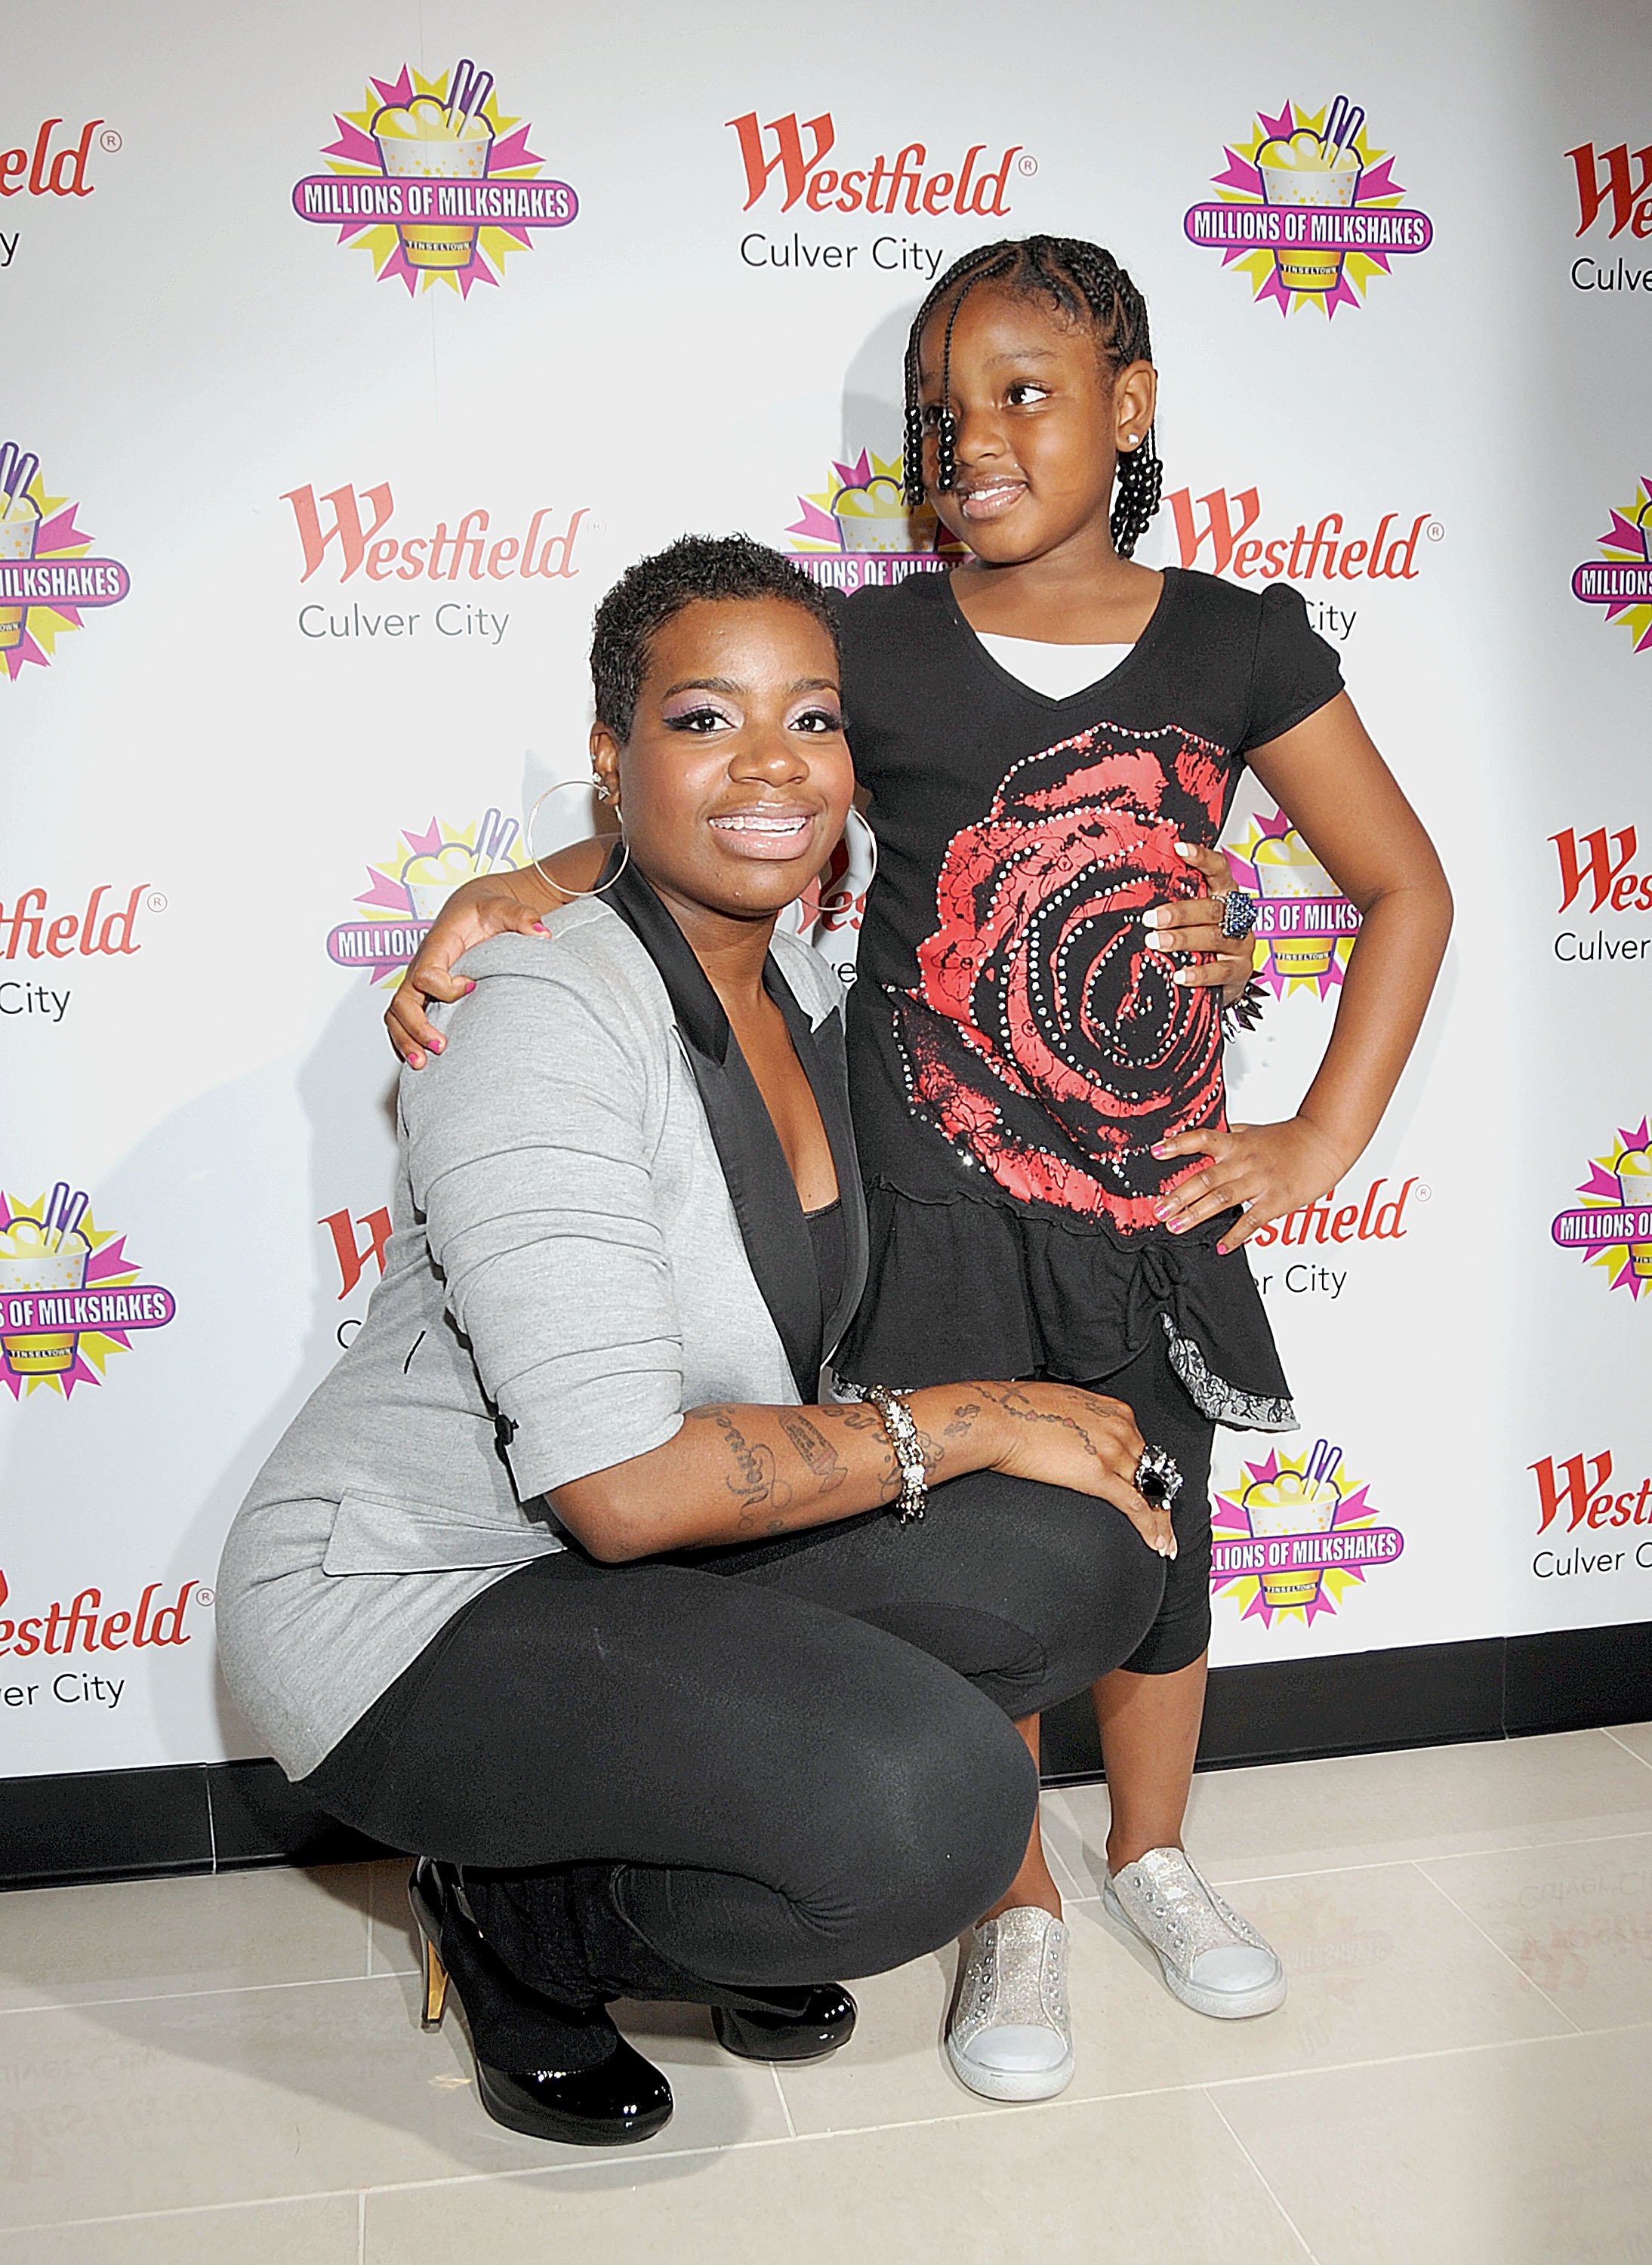 Fantasia Barrino and daughter Zion Barrino at Millions of Milkshakes in 2010 | Source: Getty Images